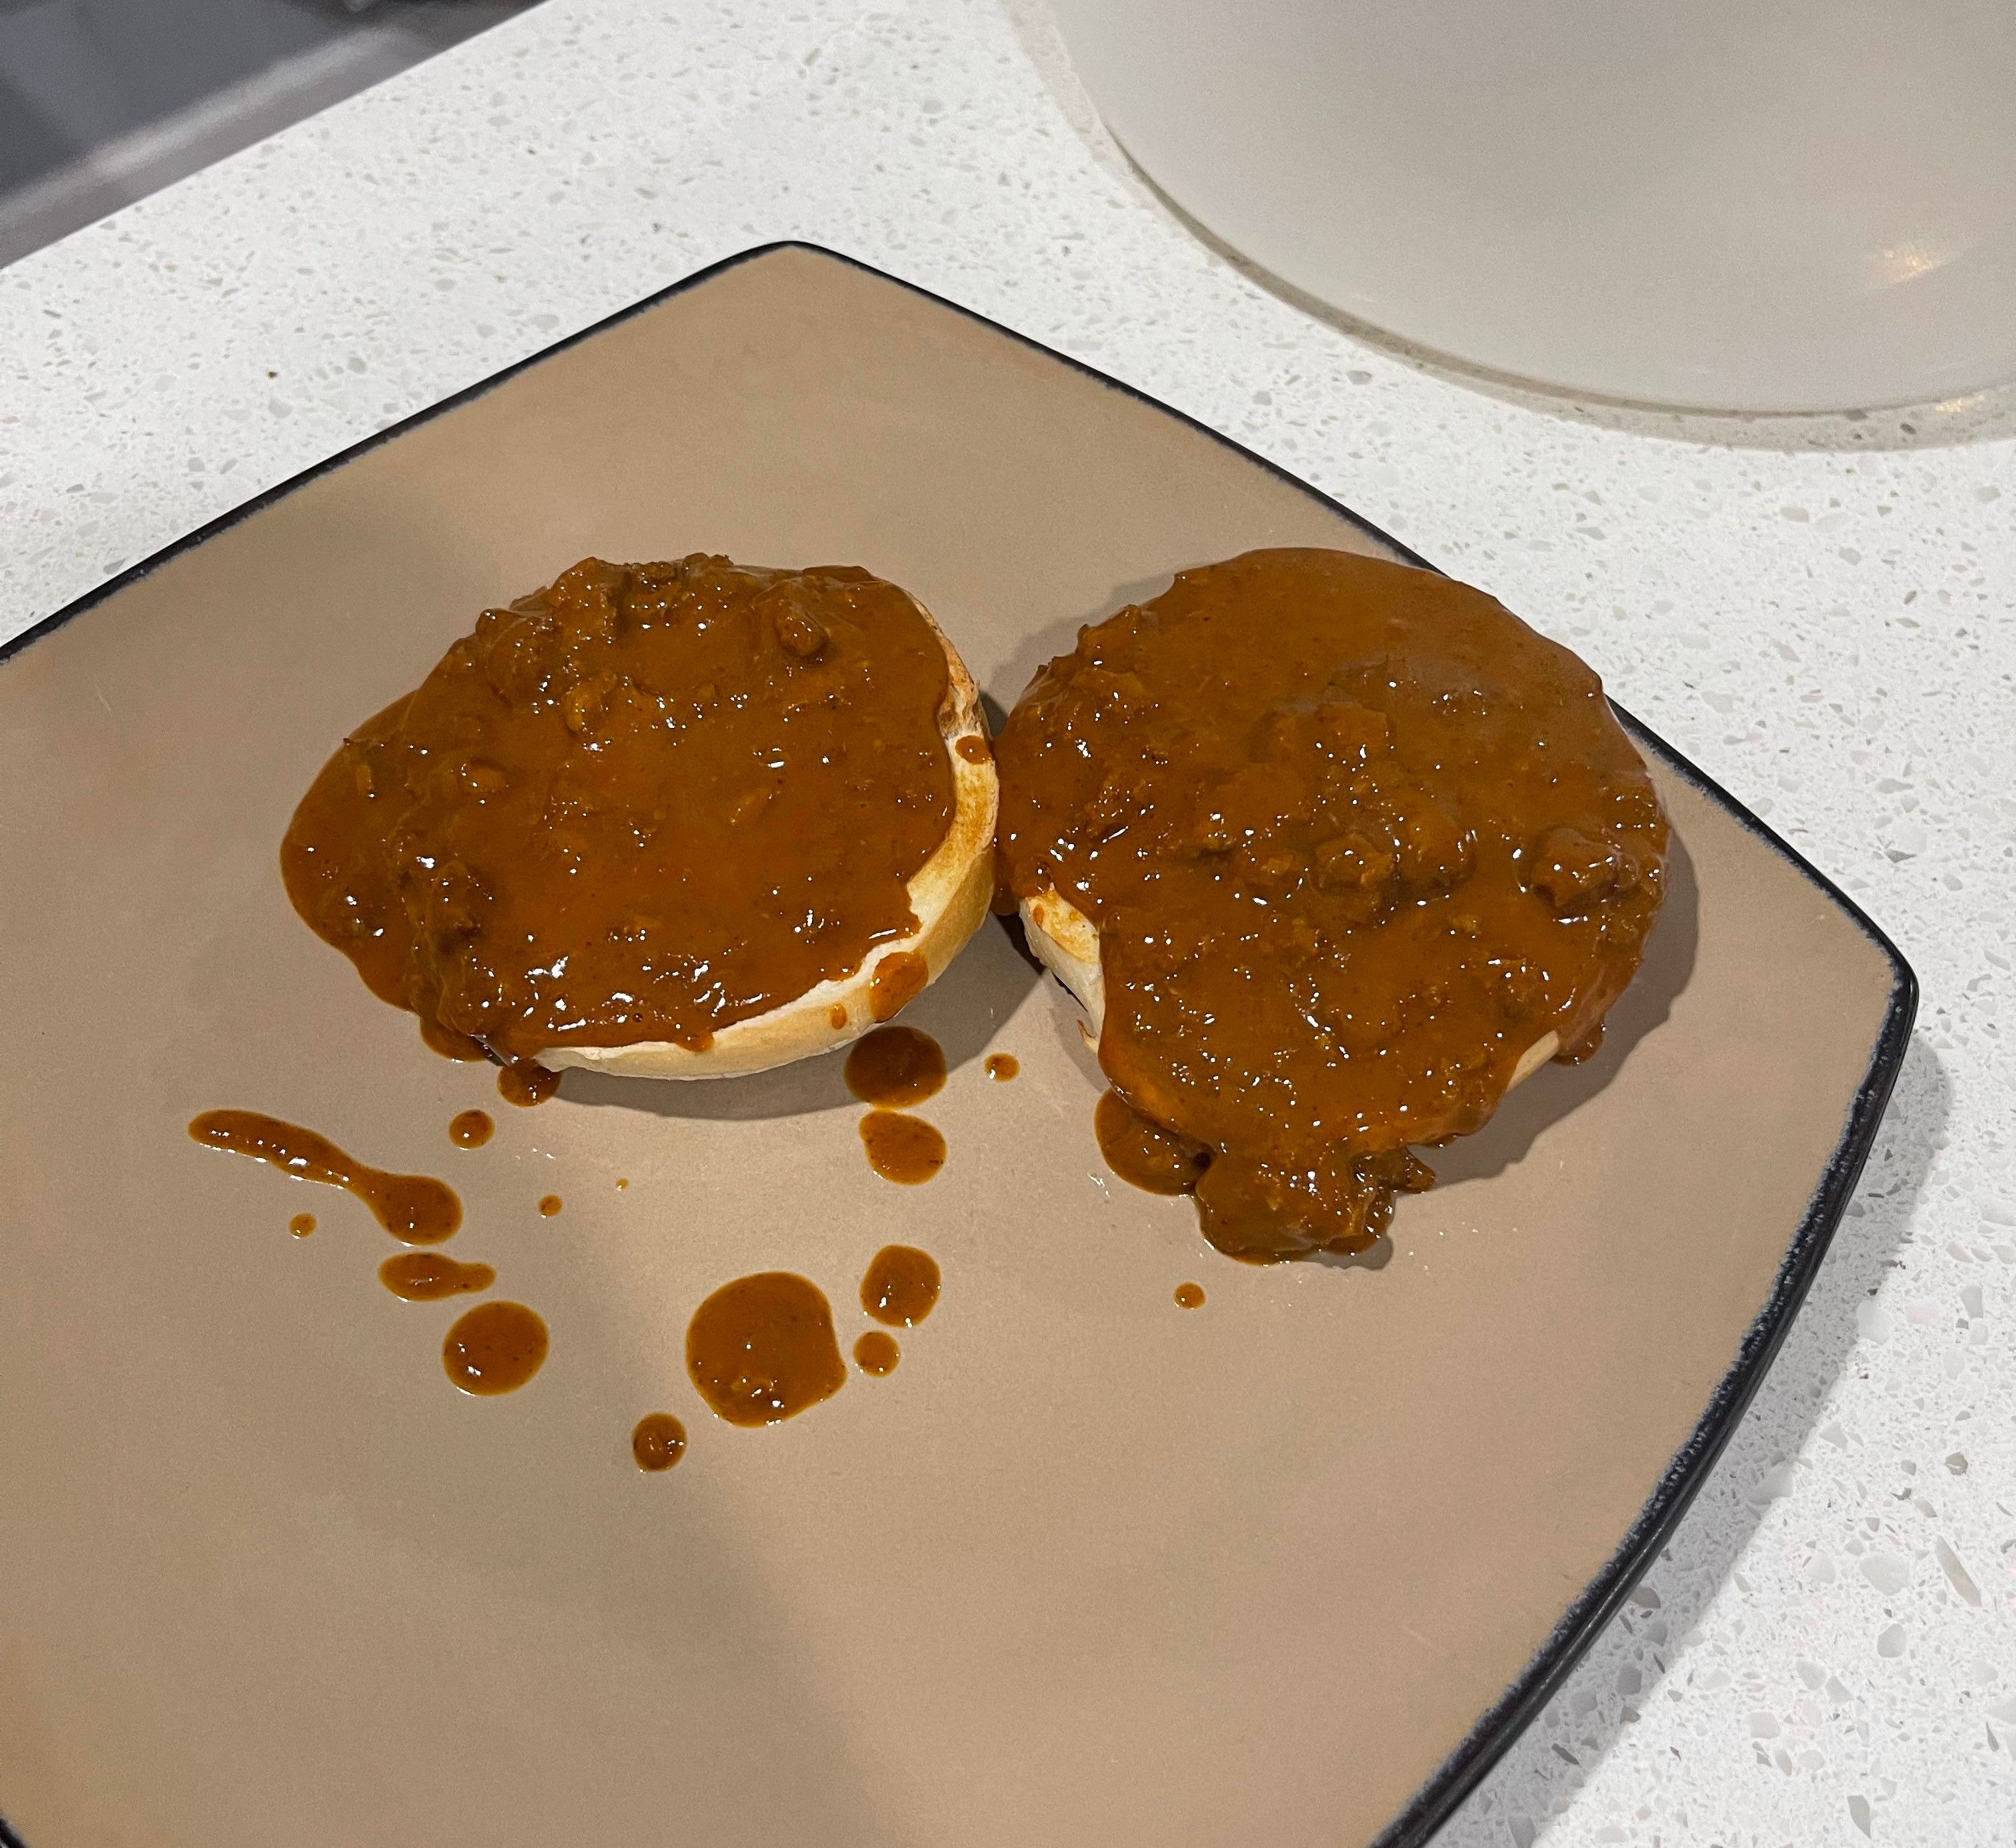 a toasted bagel cut in half with a ton of sloppy chili drowning it